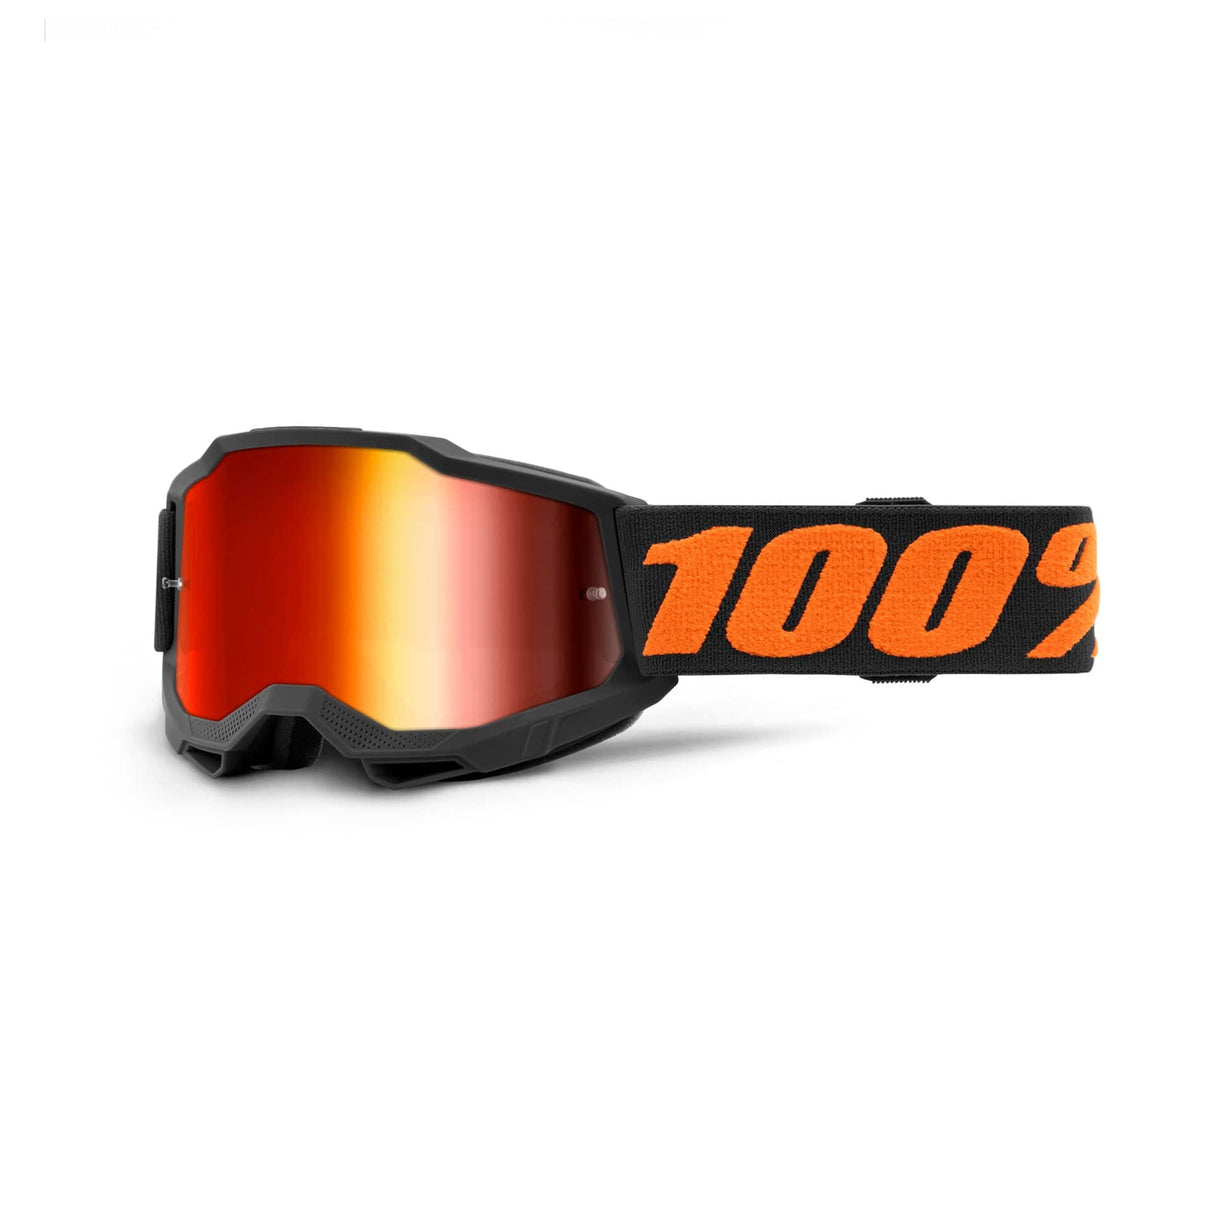 100 Percent Accuri 2 Youth Goggle Chicago/Mirror Red Lens Mountain bike goggles